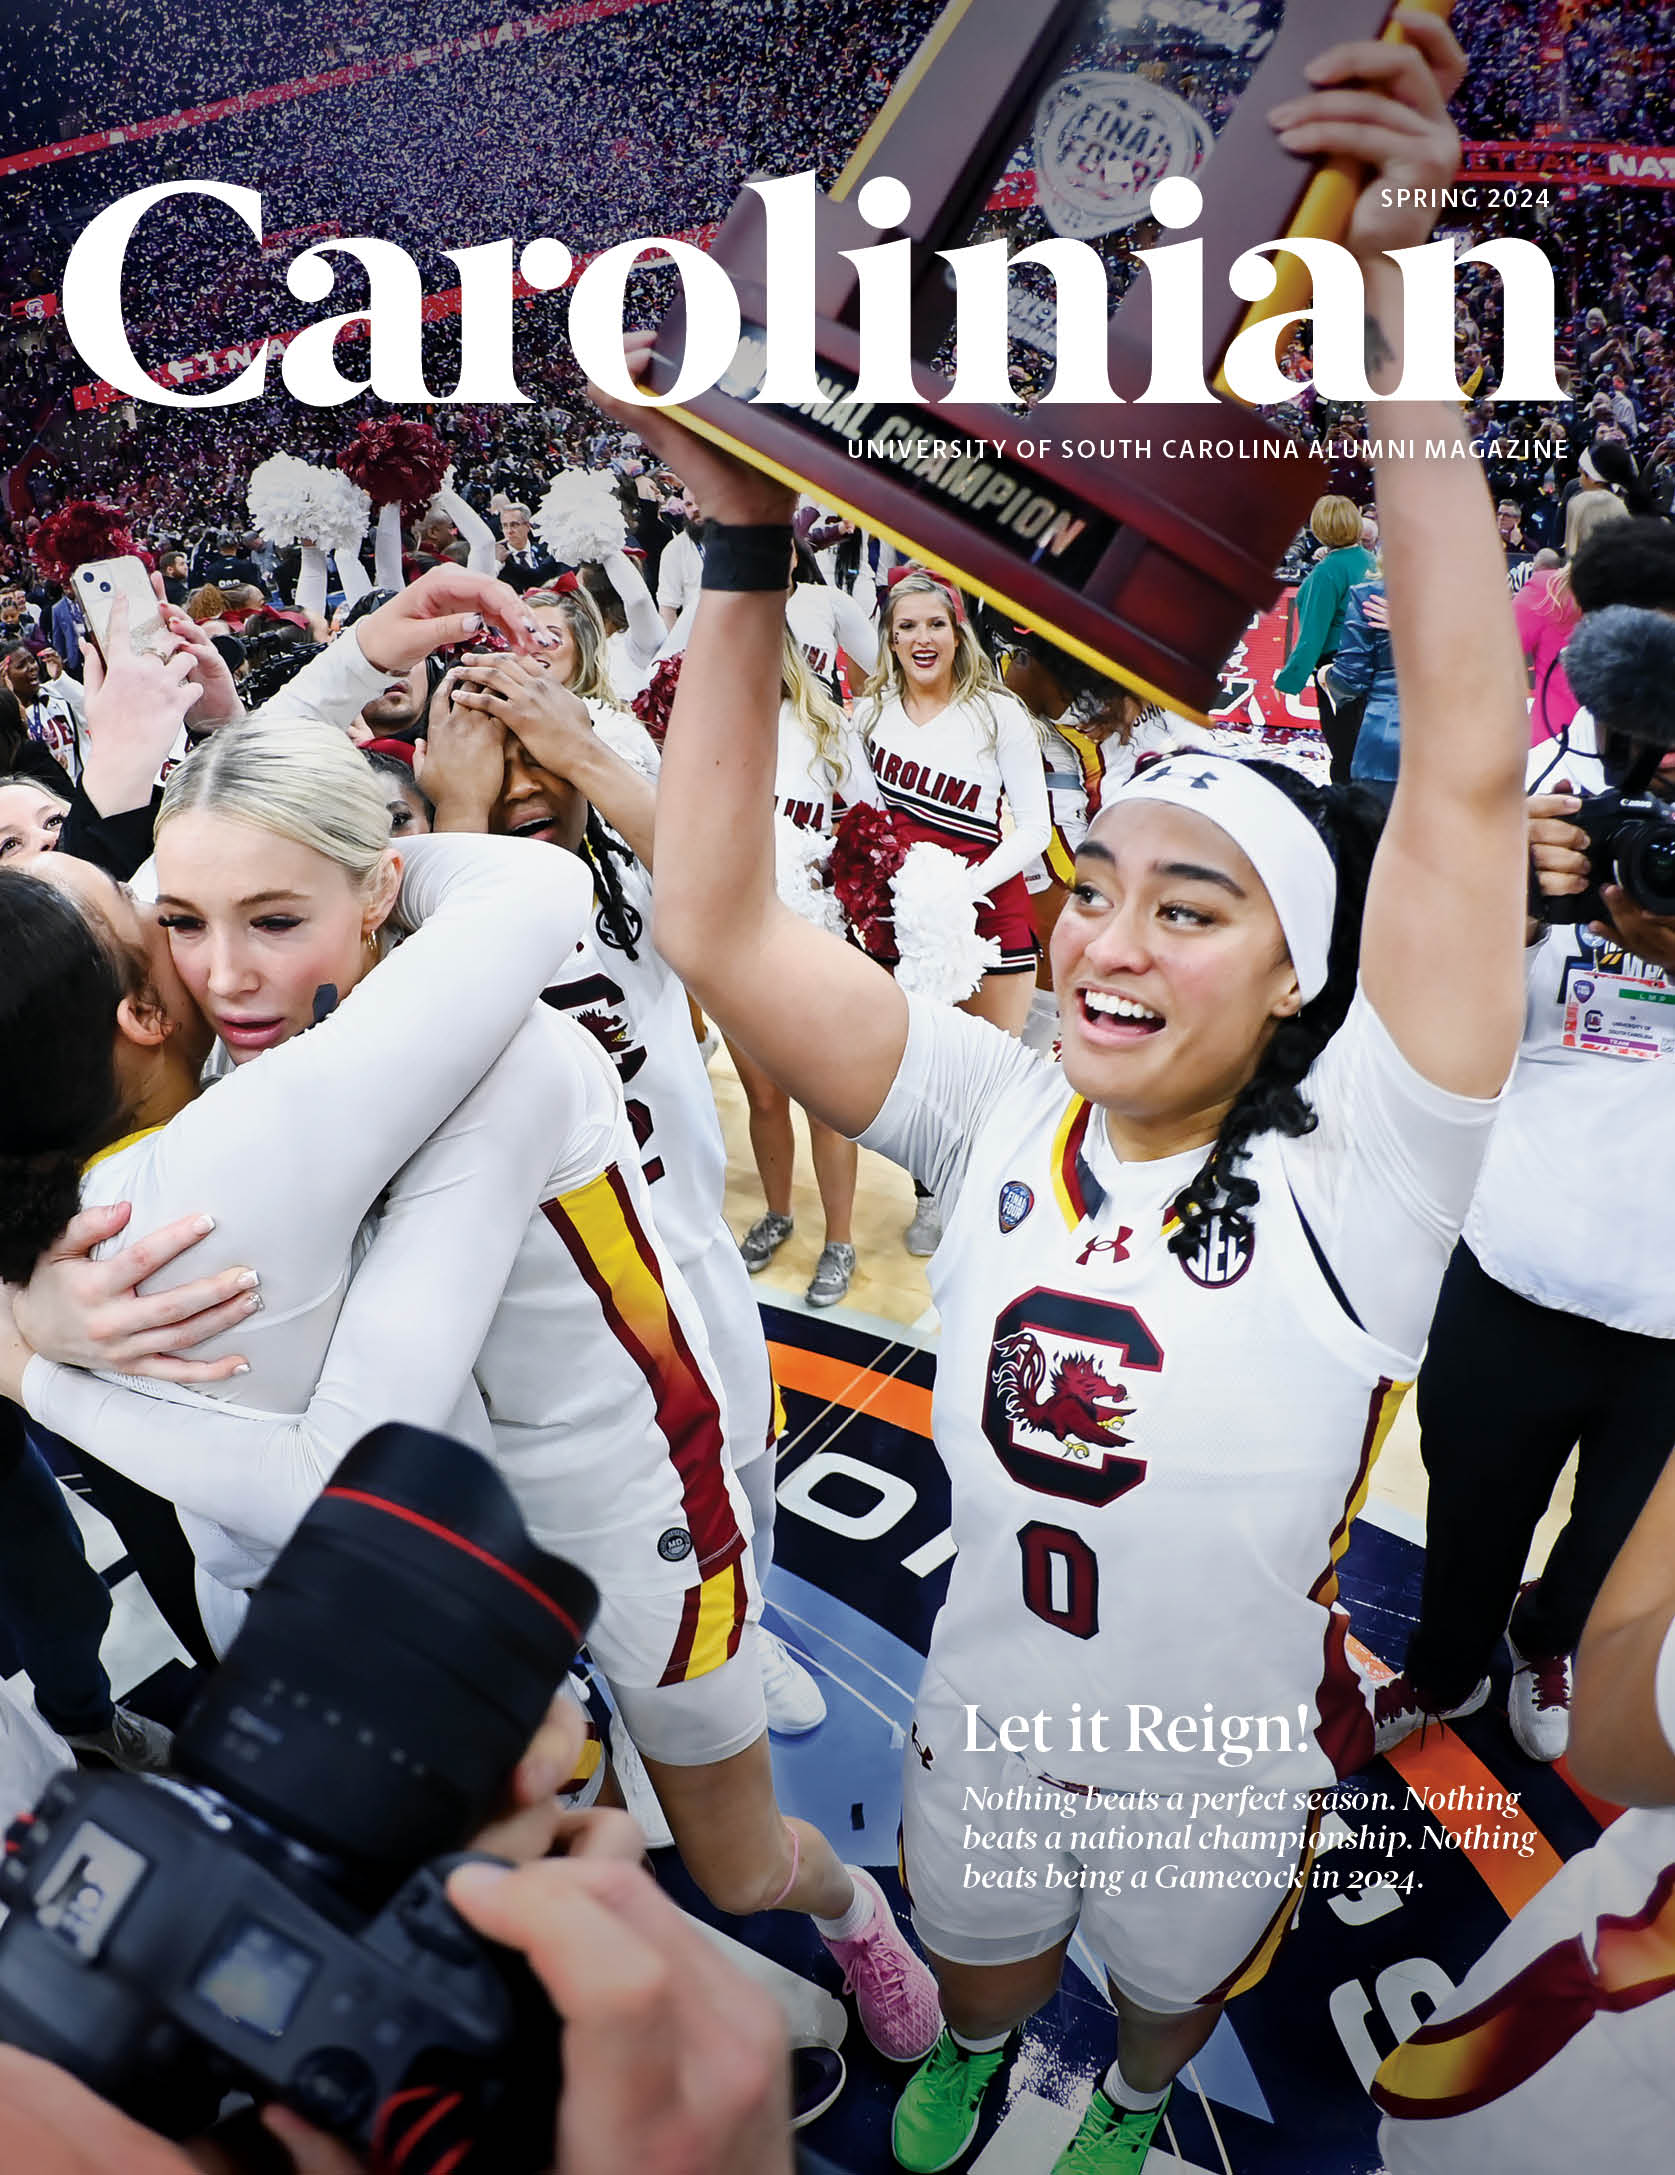 Cover of the Carolinian Magazine featuring an illustration of Kev Roche.